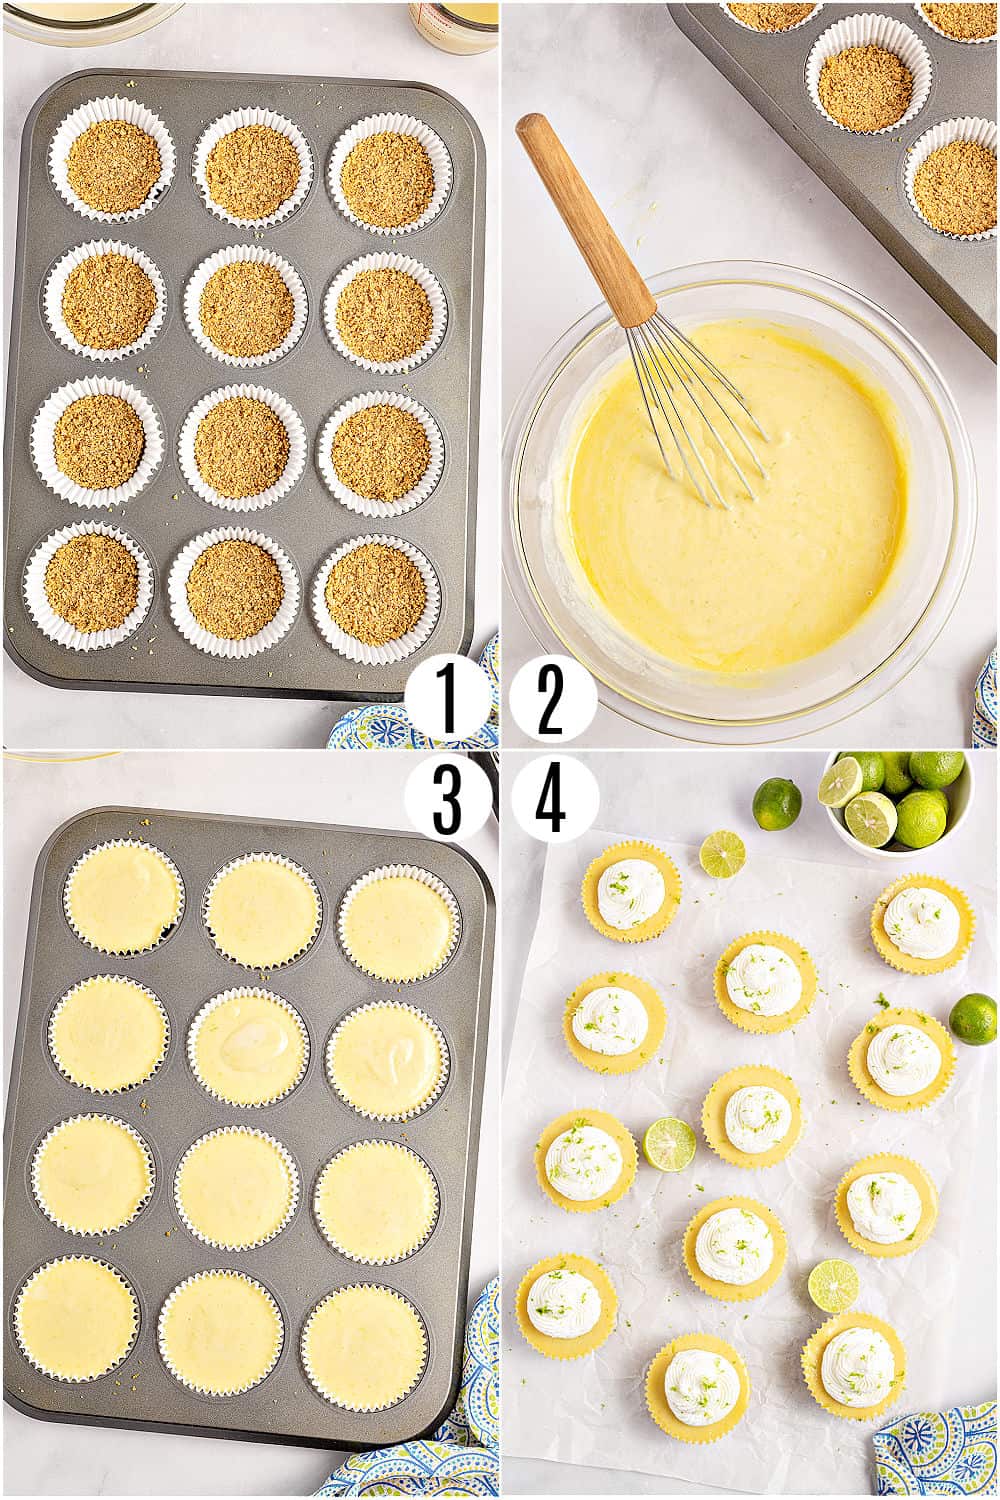 Step by step photos showing how to make key lime pies in individual muffin cups.